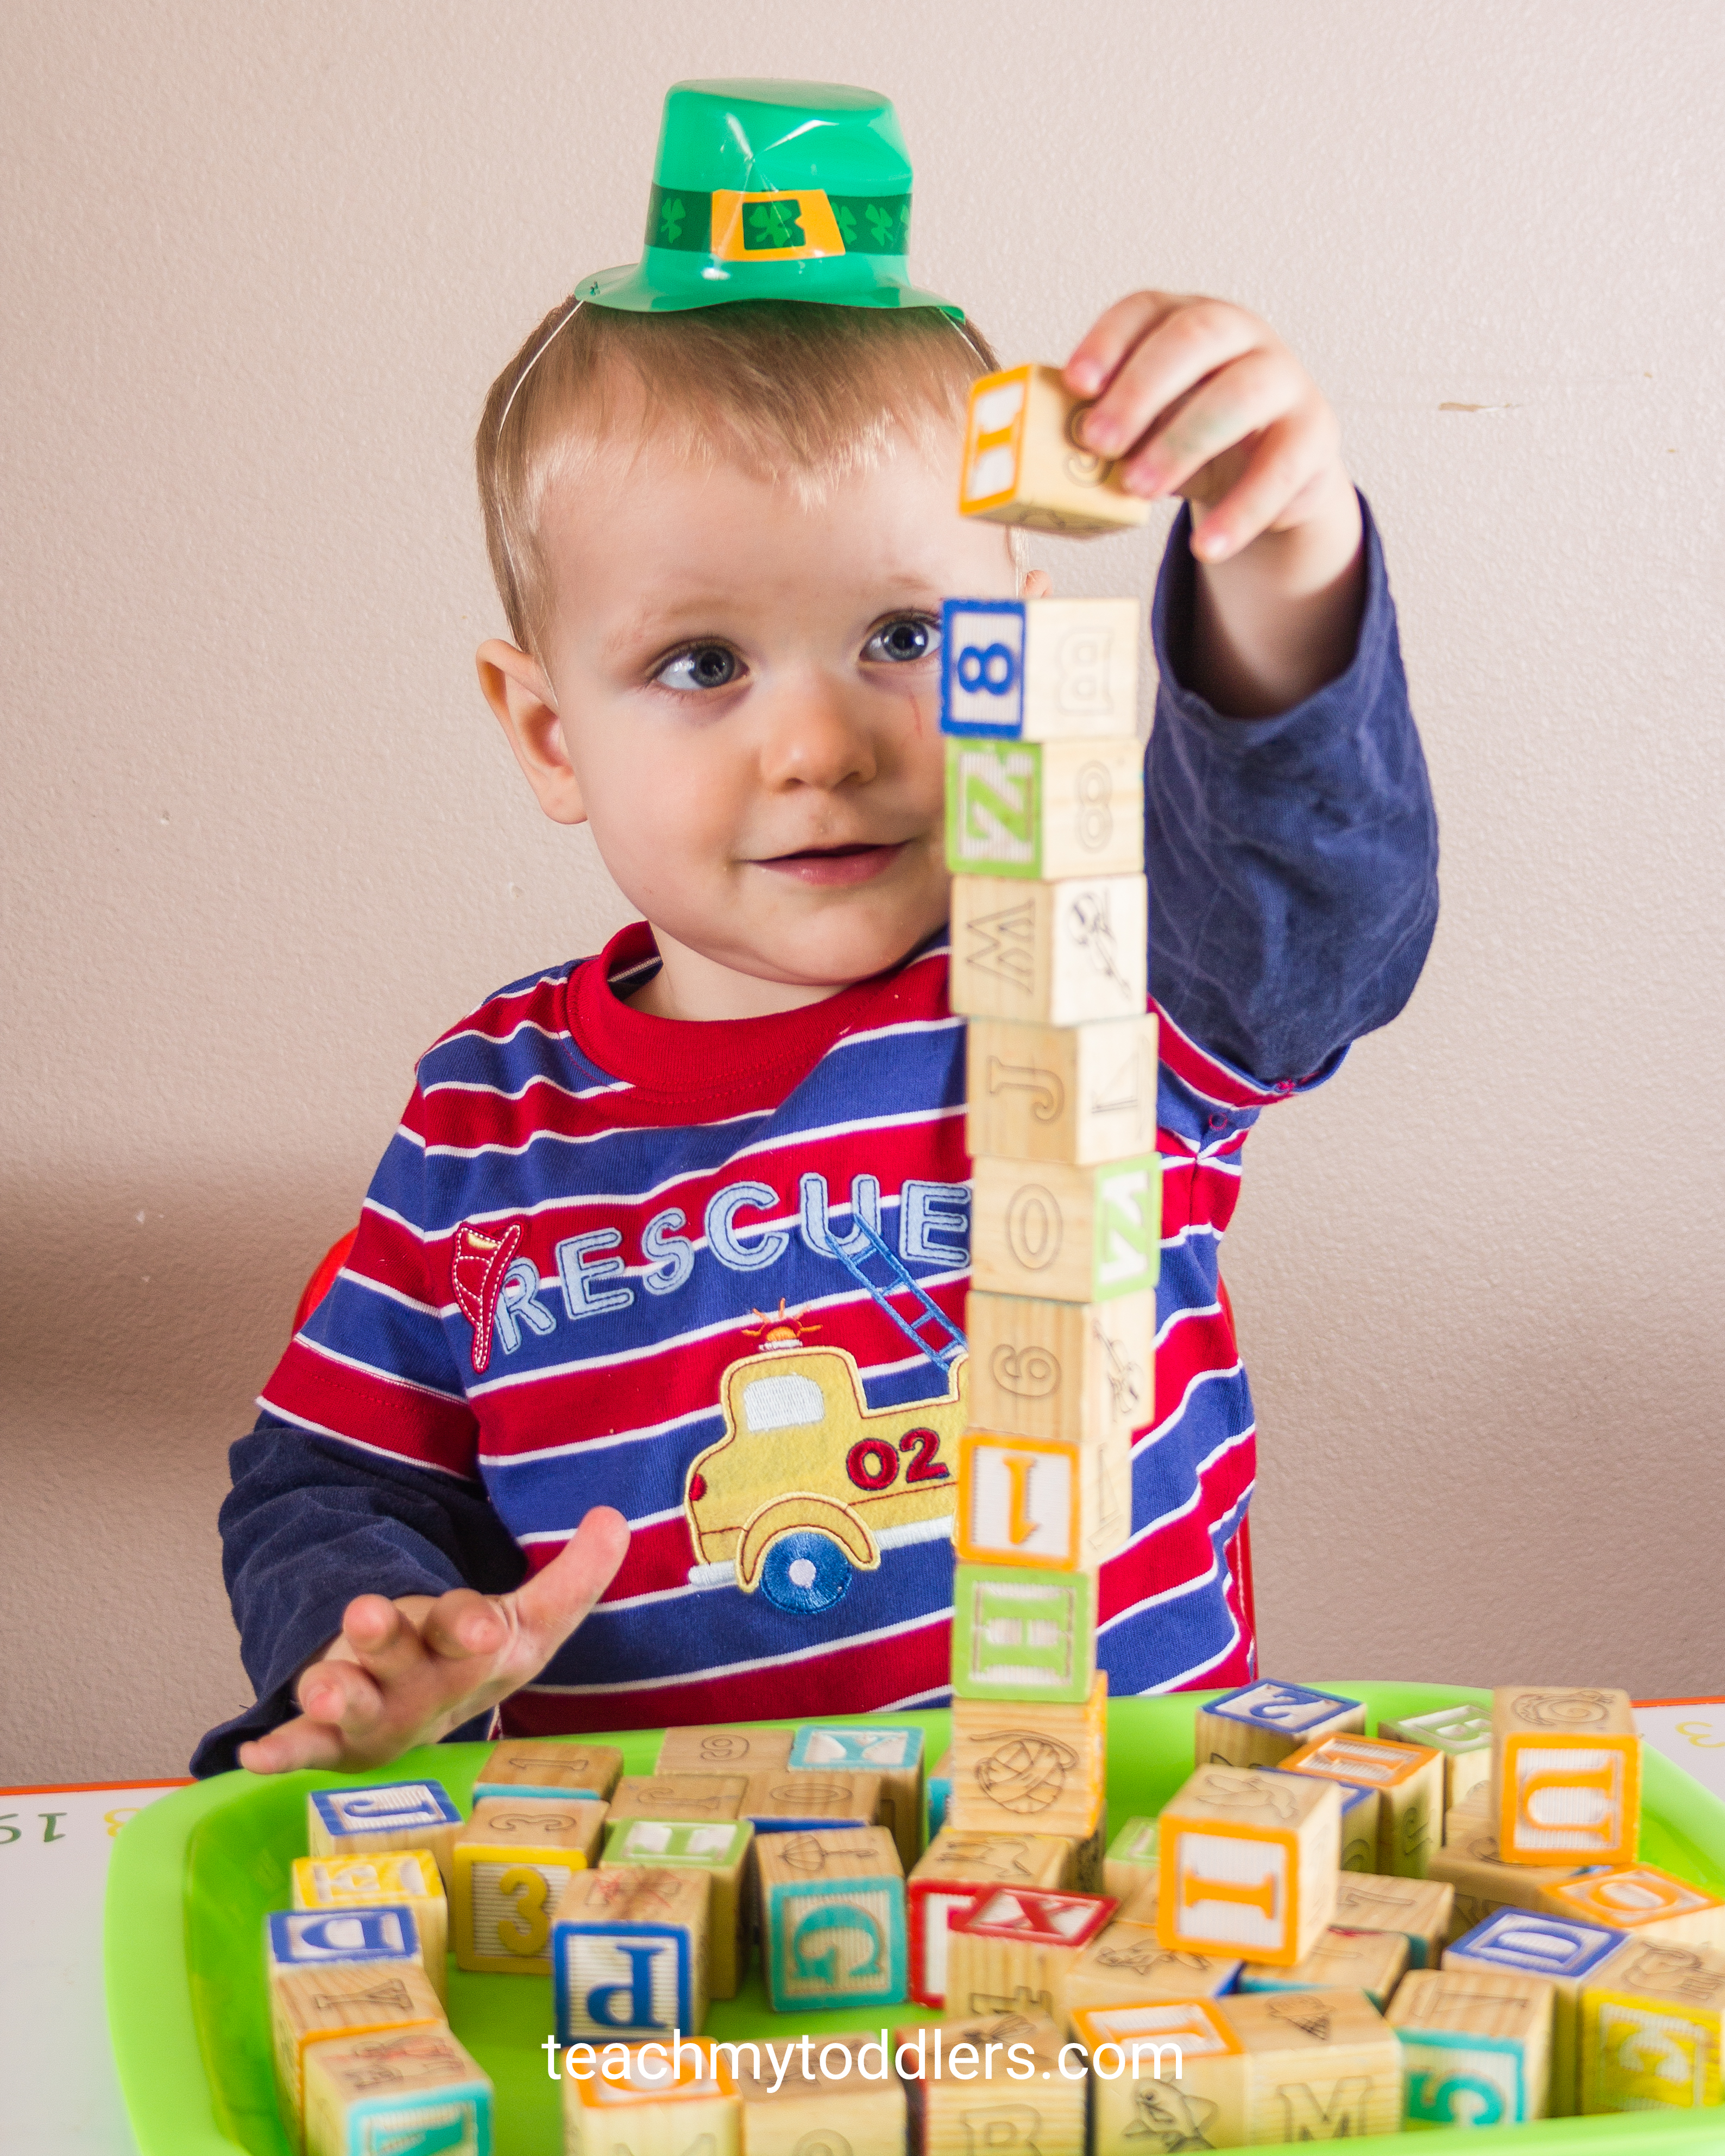 Use these awesome St. Patrick's Day activities to teach toddlers about st. patrick's day